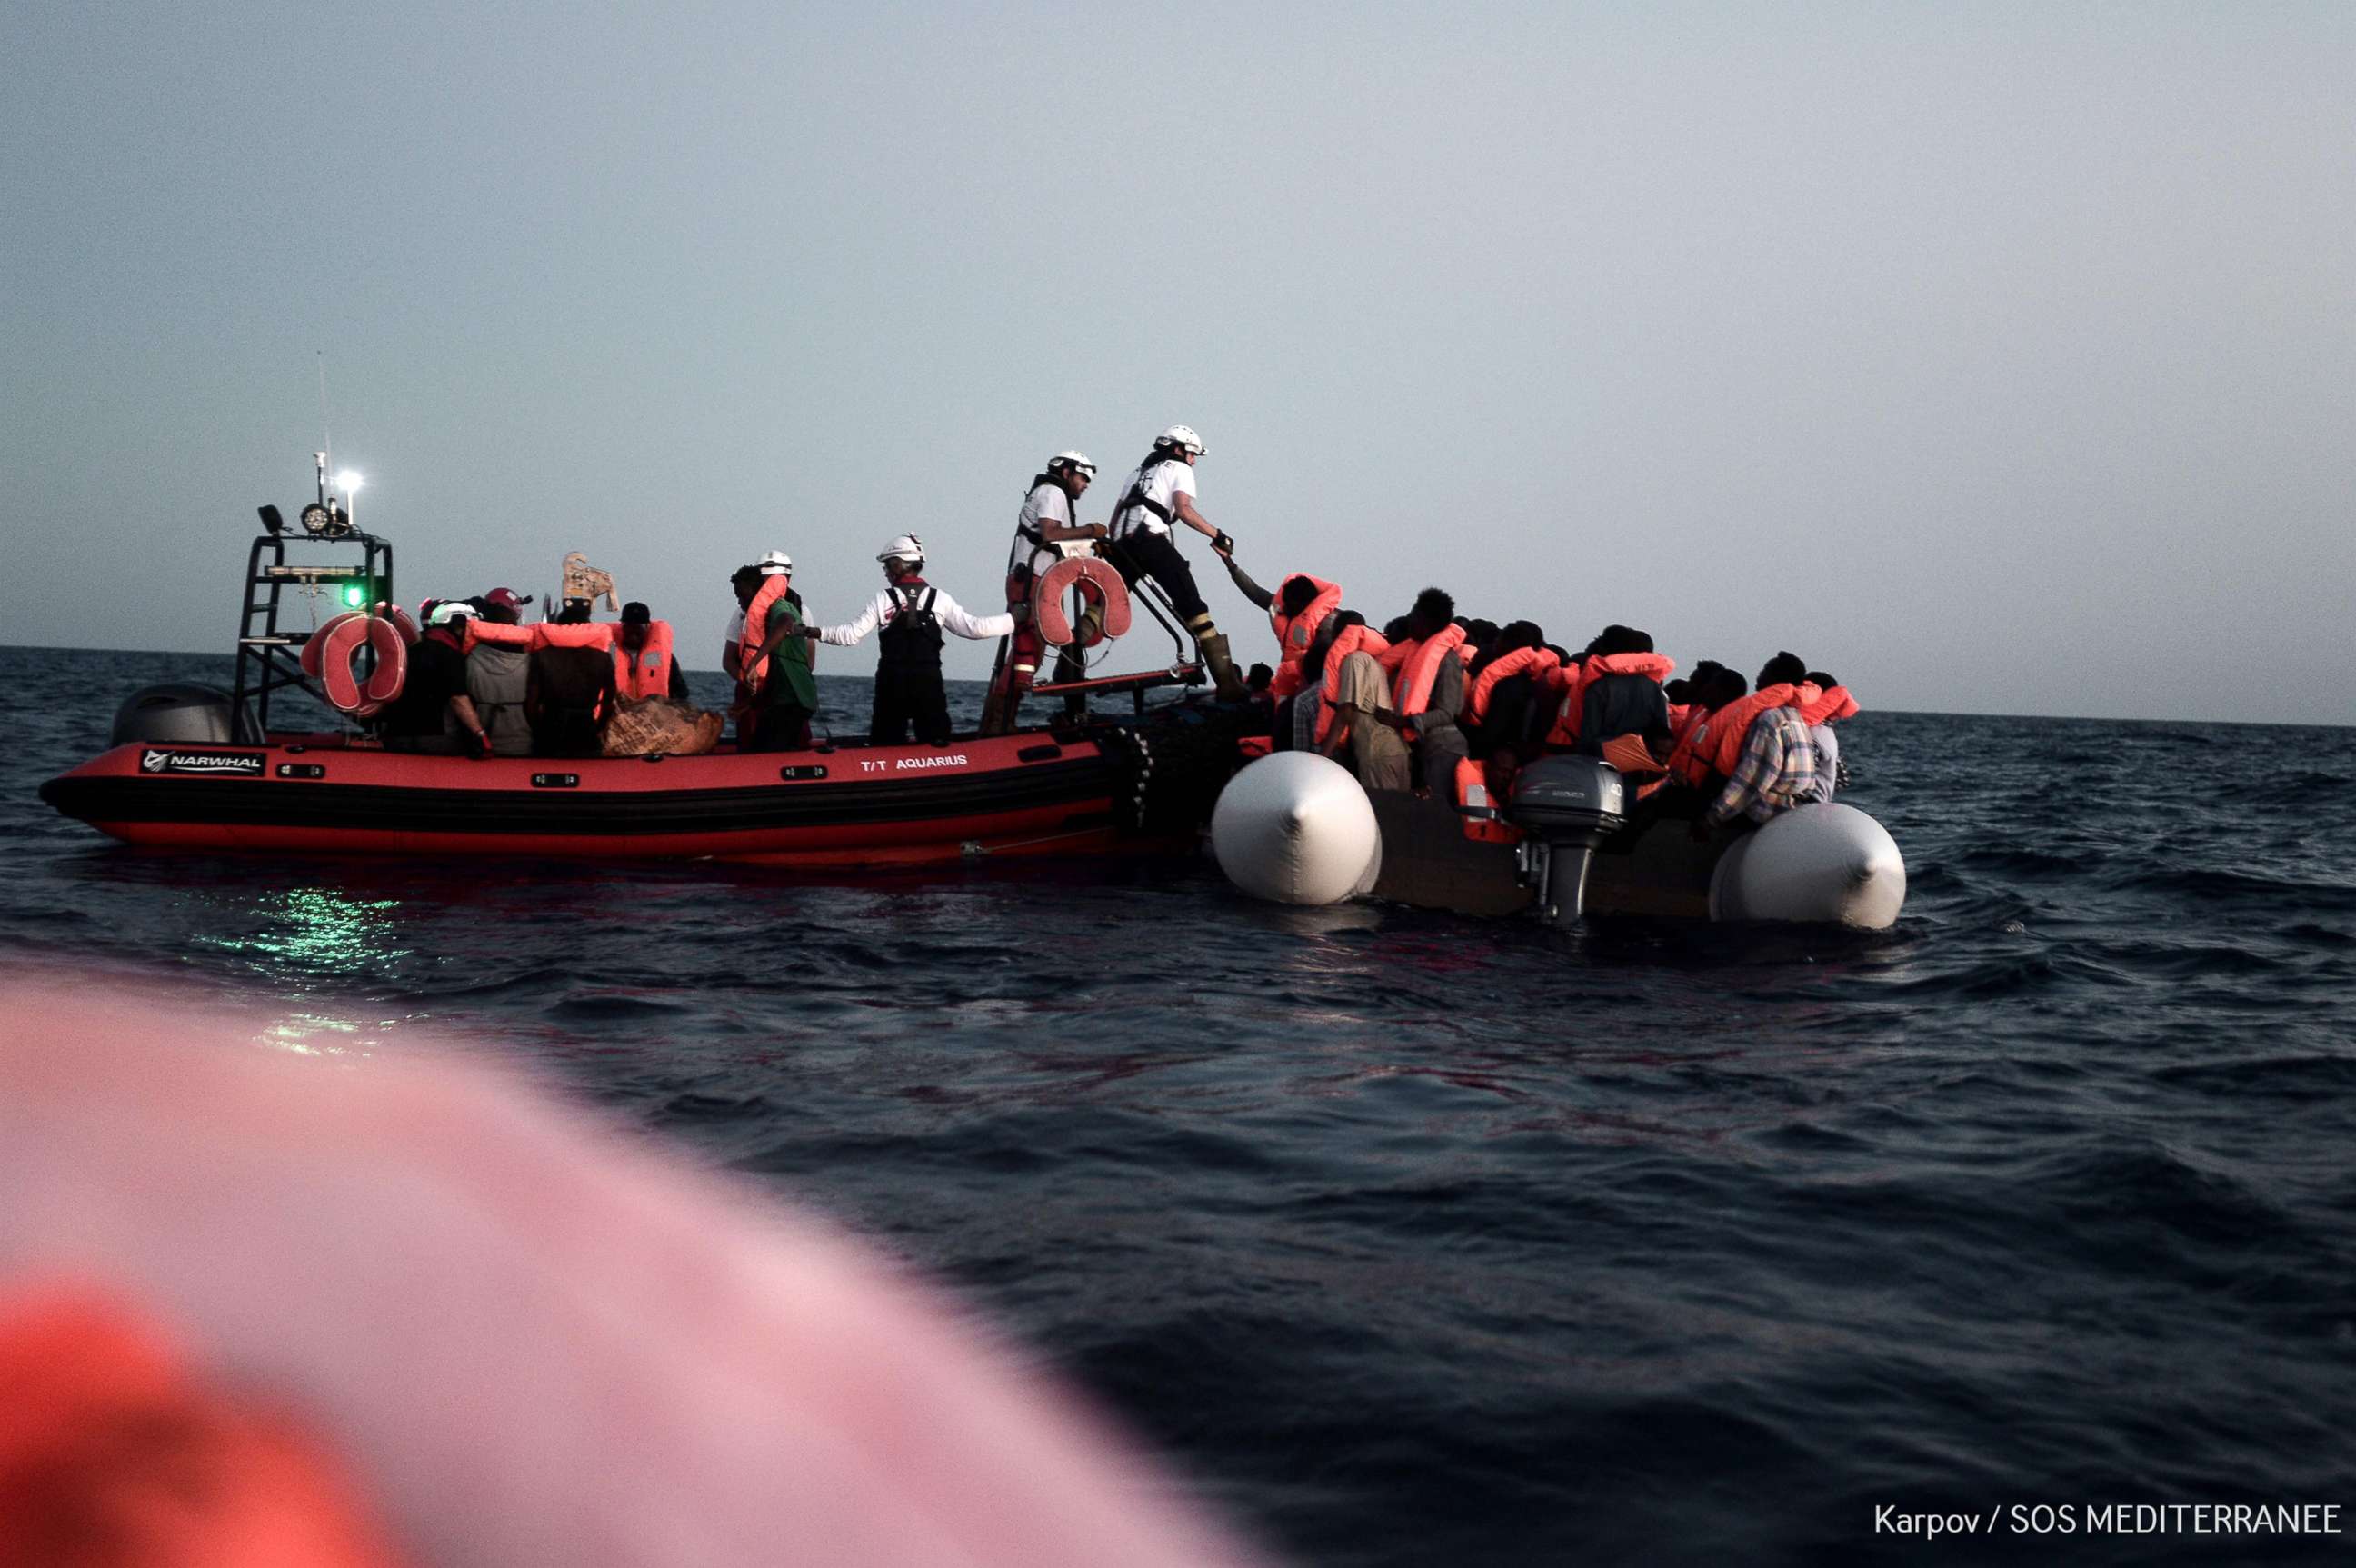 PHOTO: Migrants are rescued in the Mediterranean sea on June 9, 2018 in a picture released on June 11, 2018 by SOS Mediterranee, before boarding the French NGO's ship Aquarius.